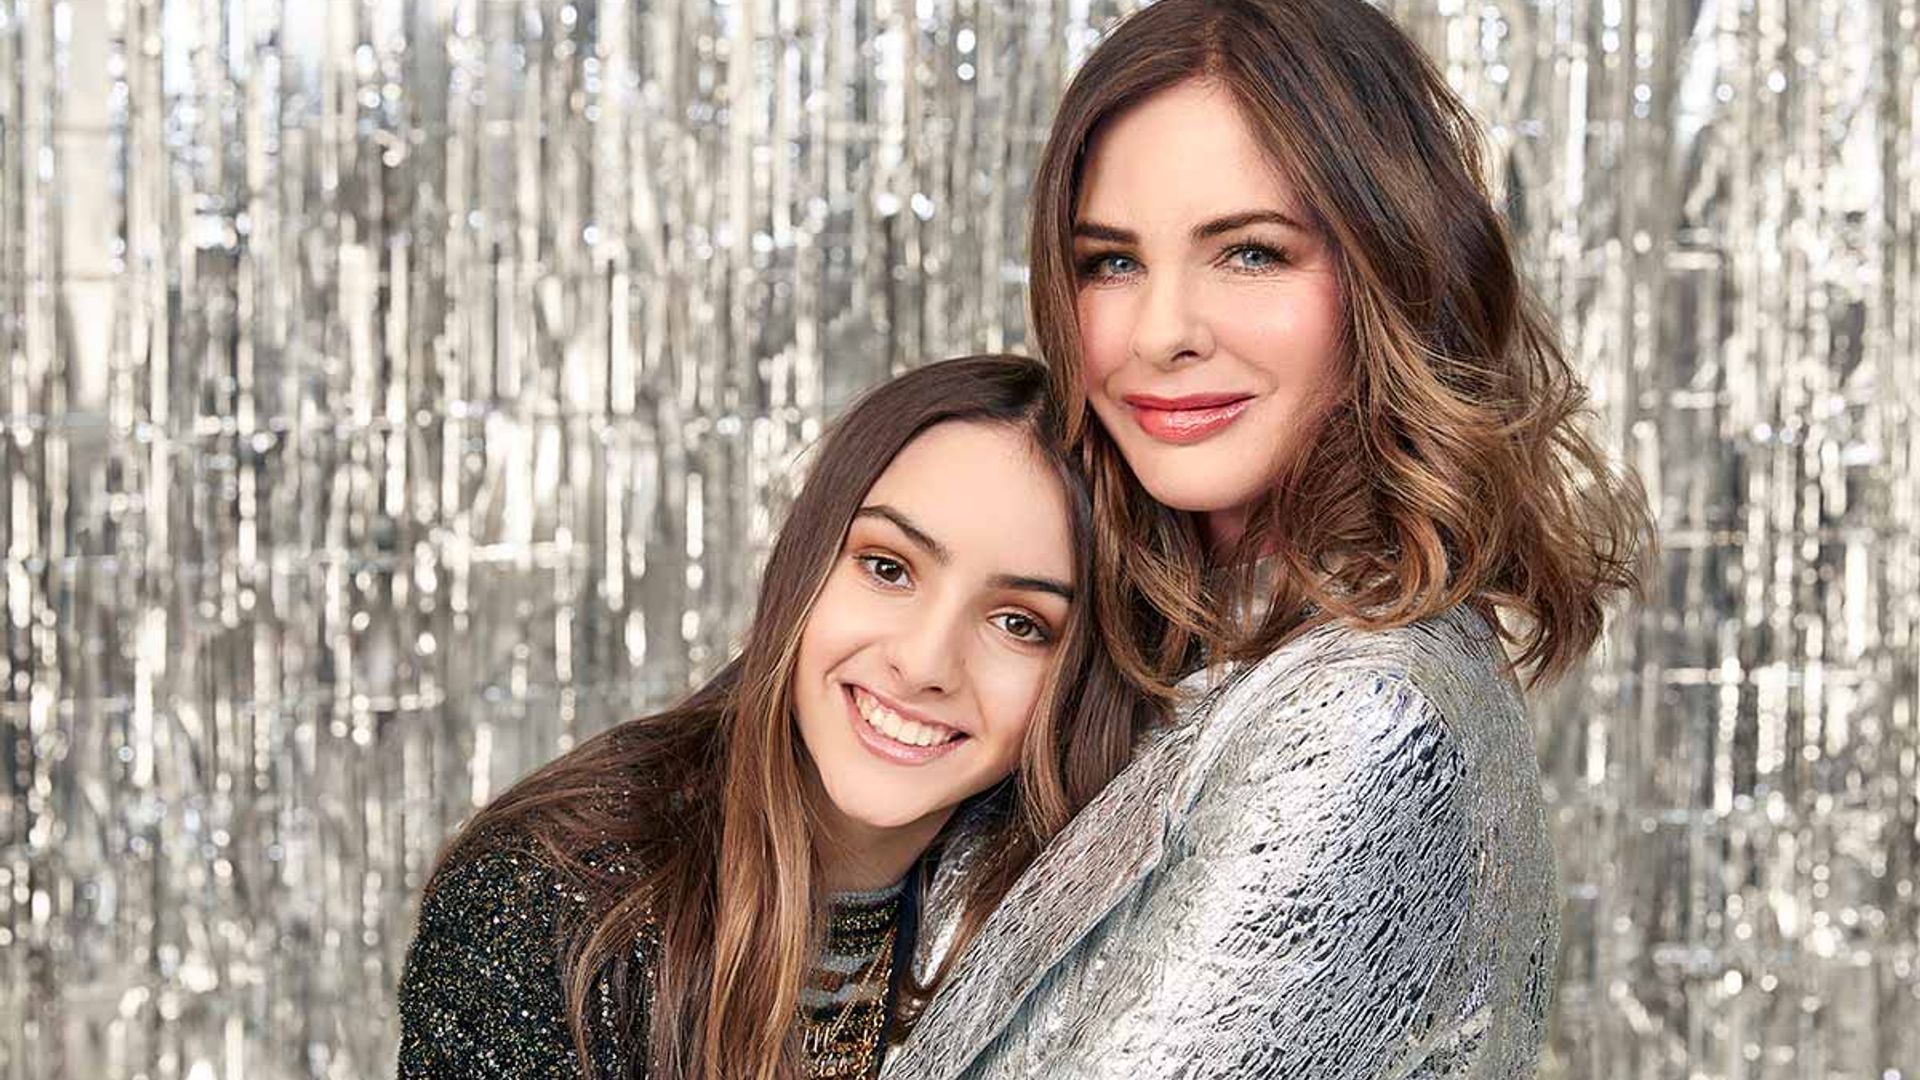 trinny woodall daughter lila